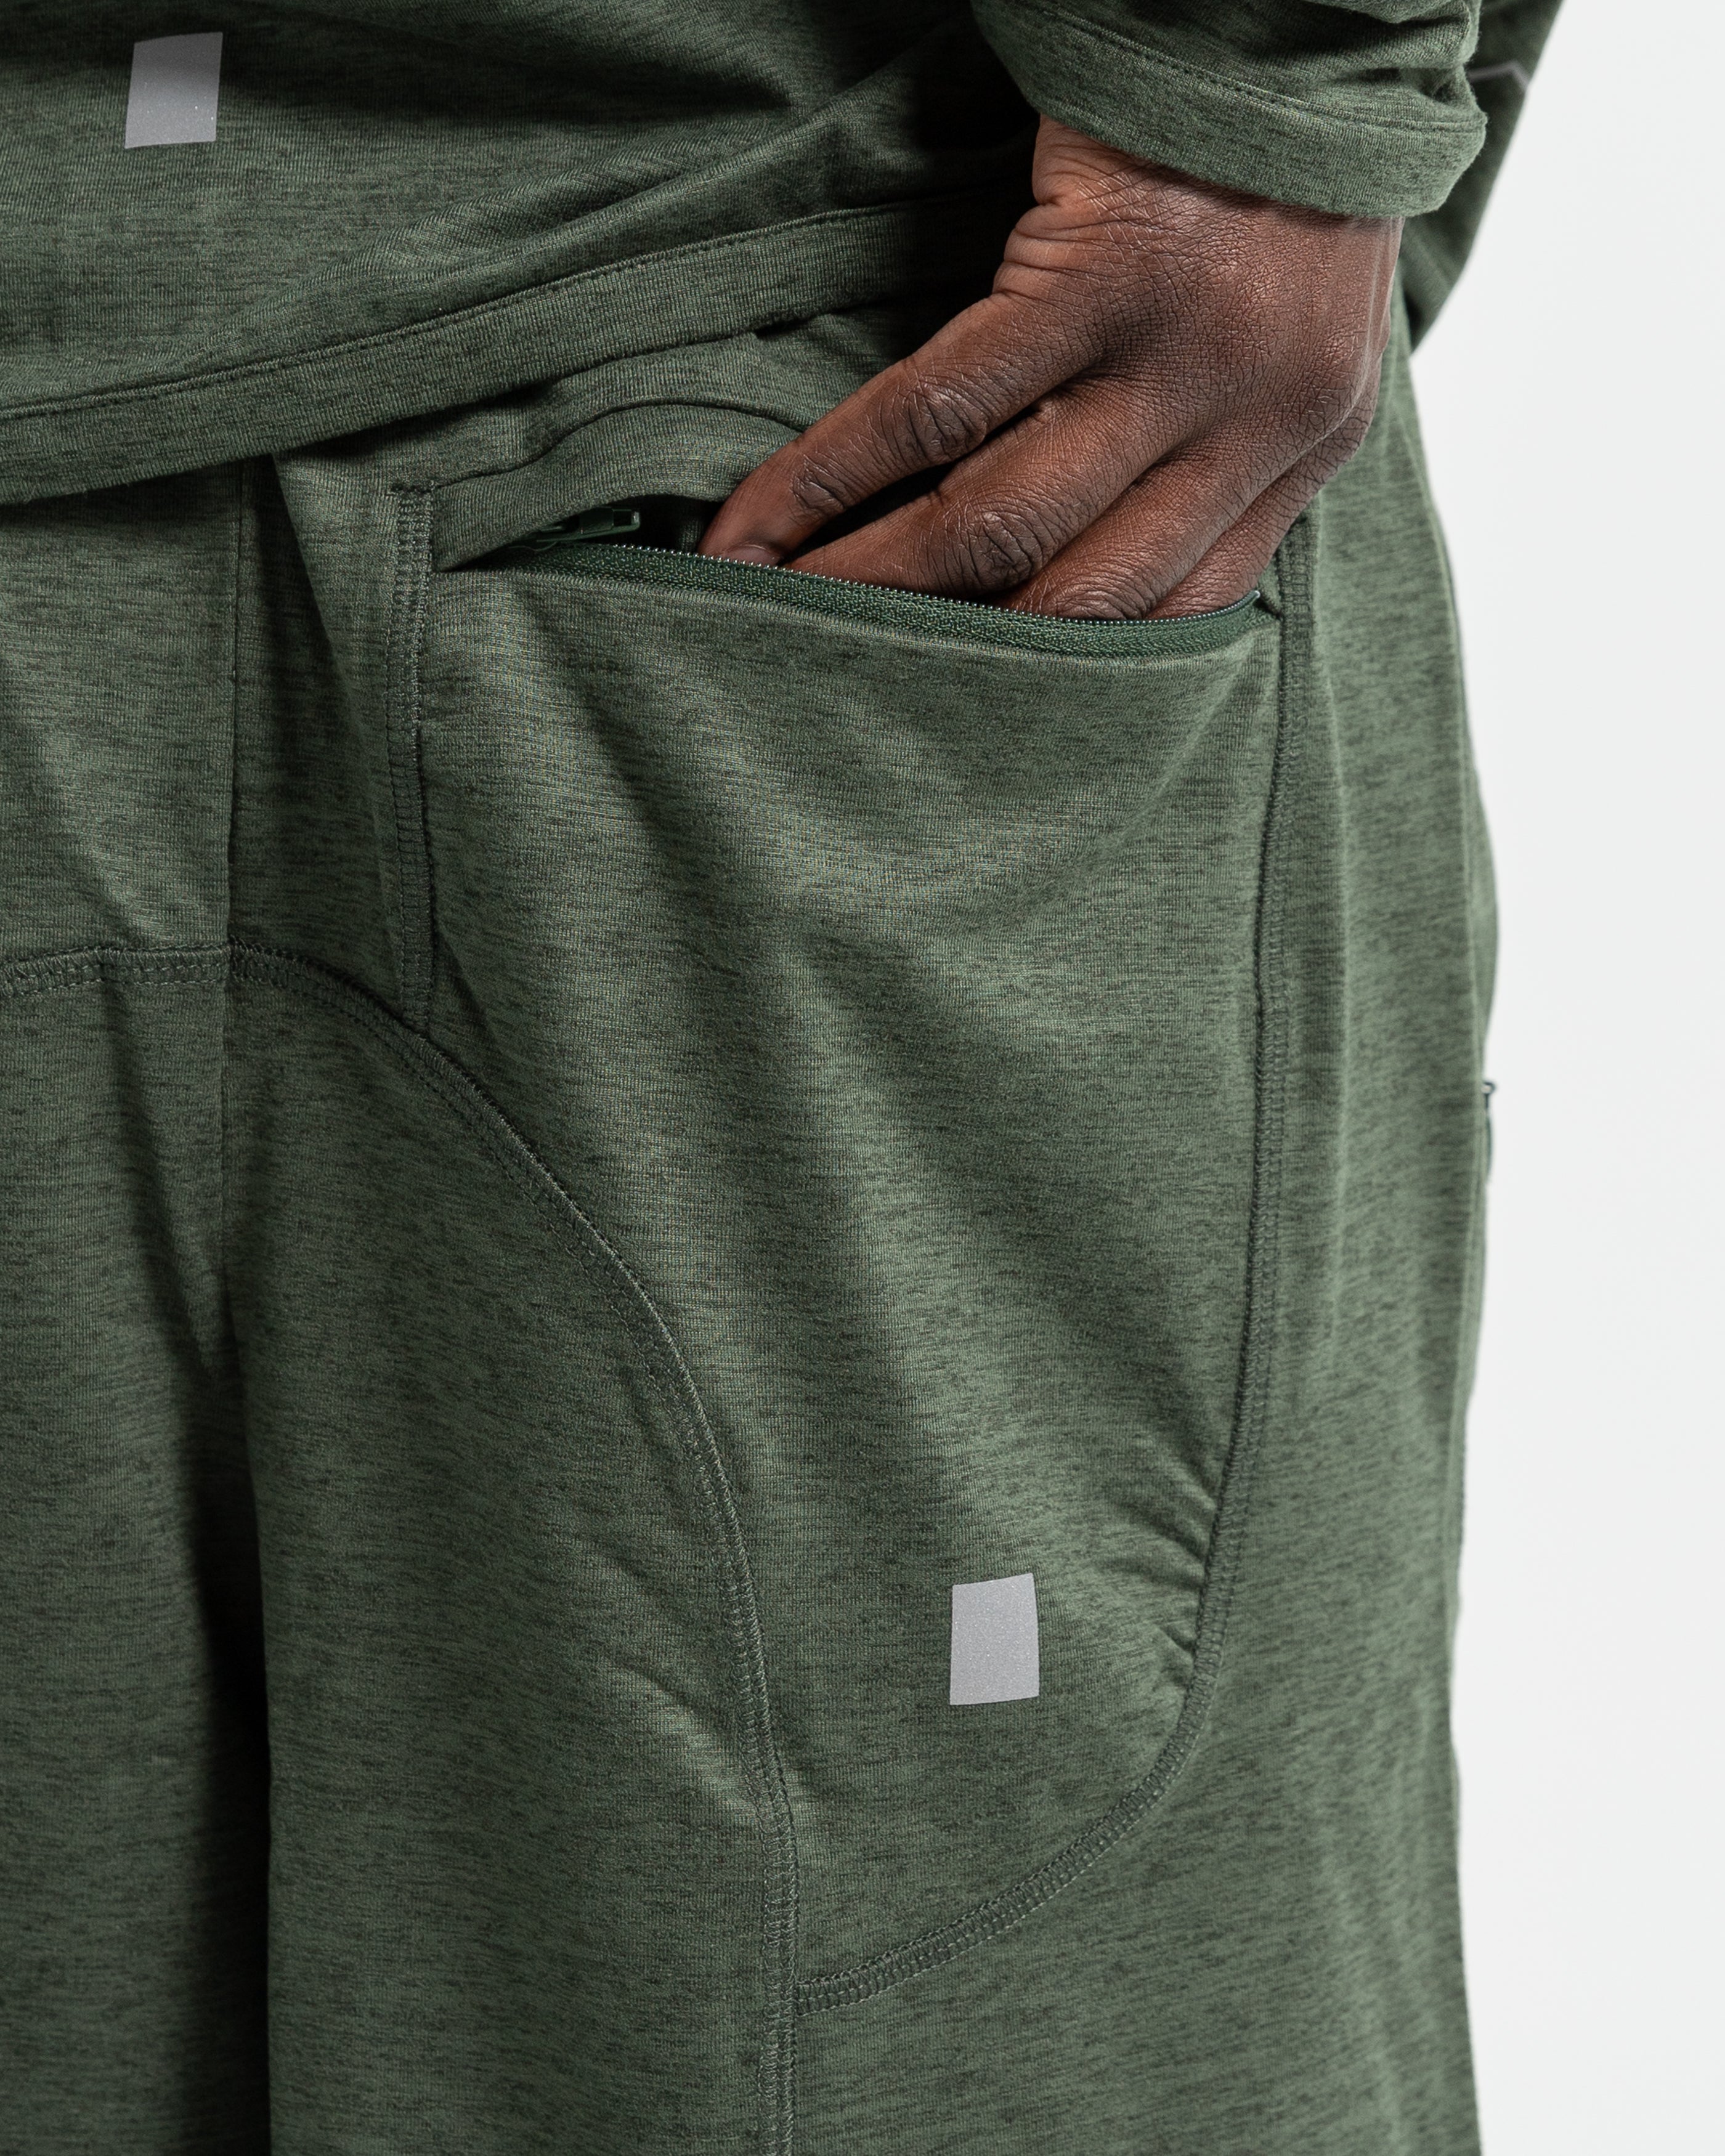 Body Map Short in Forest Green